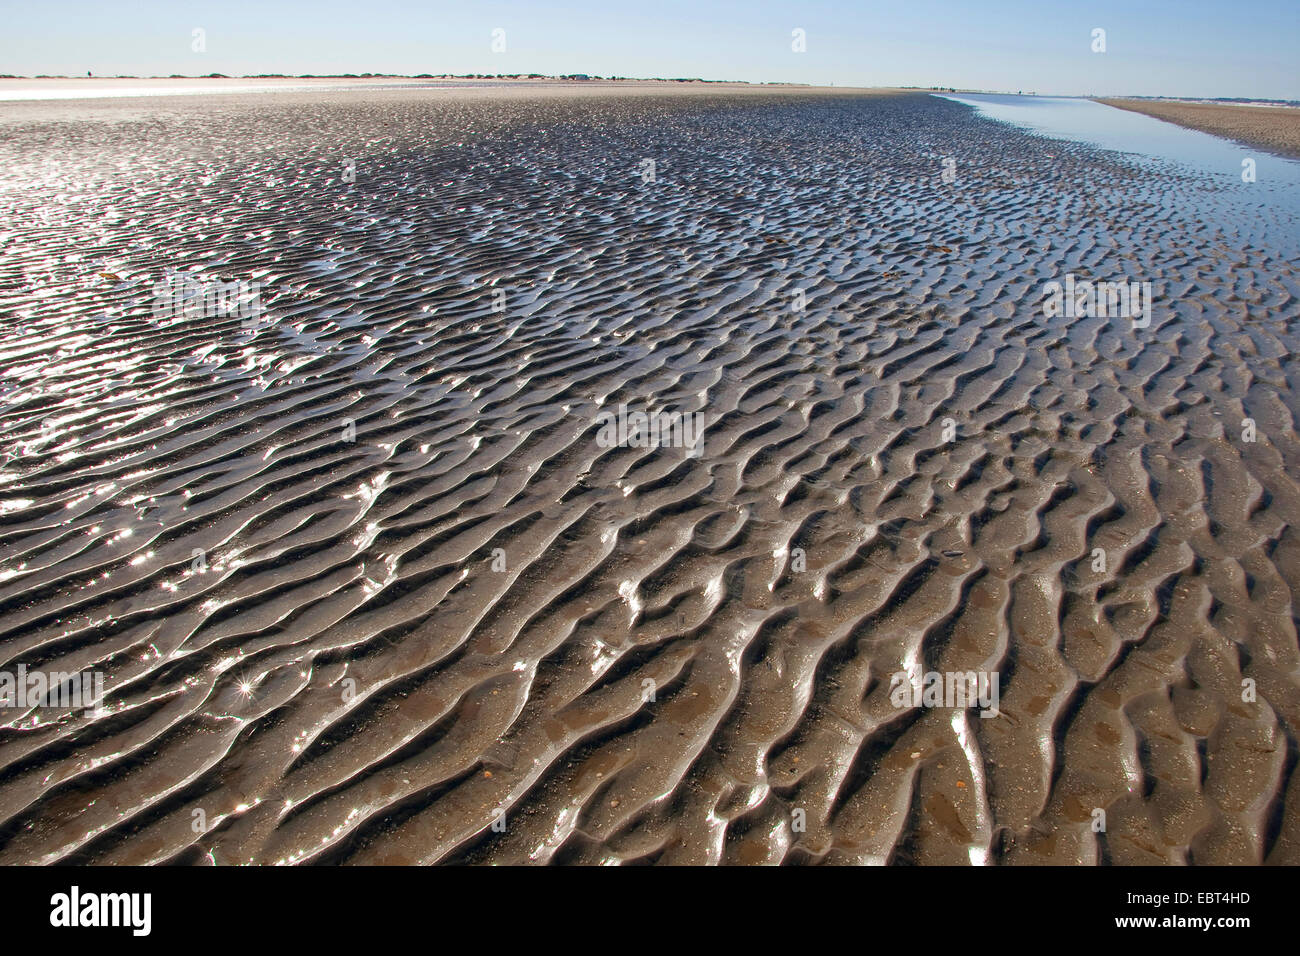 wadden sea at low tide, Germany, Schleswig-Holstein Wadden Sea National Park Stock Photo